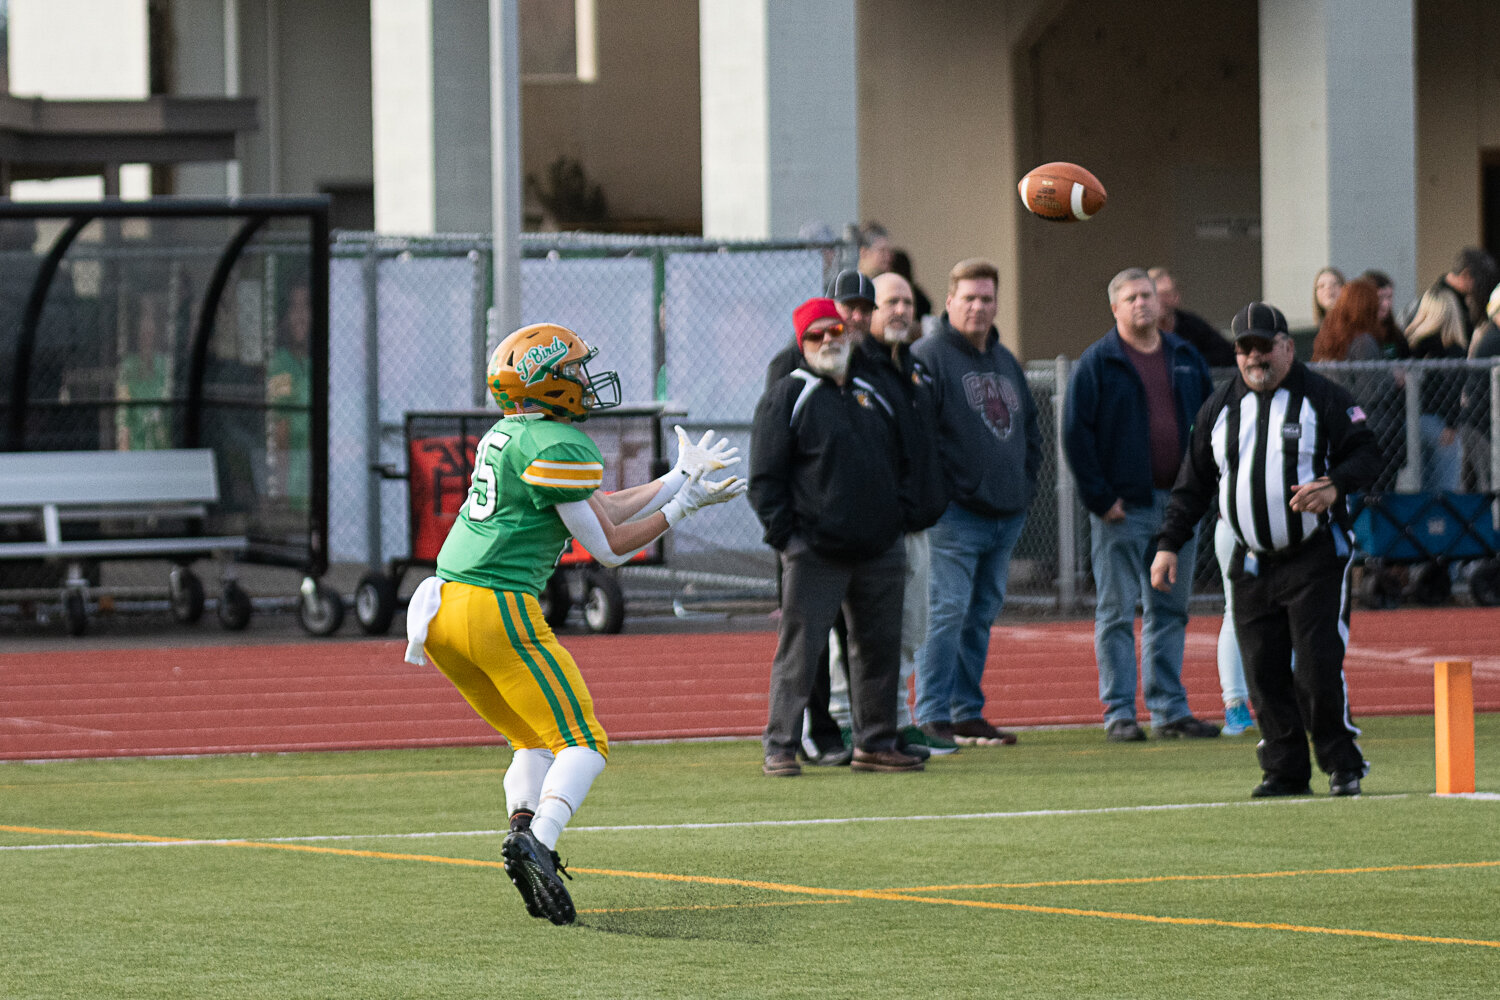 Logan Cole hauls in a touchdown in the corner of the end zone during Tumwater's 42-6 win over Clarkston in the 2A quarterfinals in Tumwater on Nov. 18.